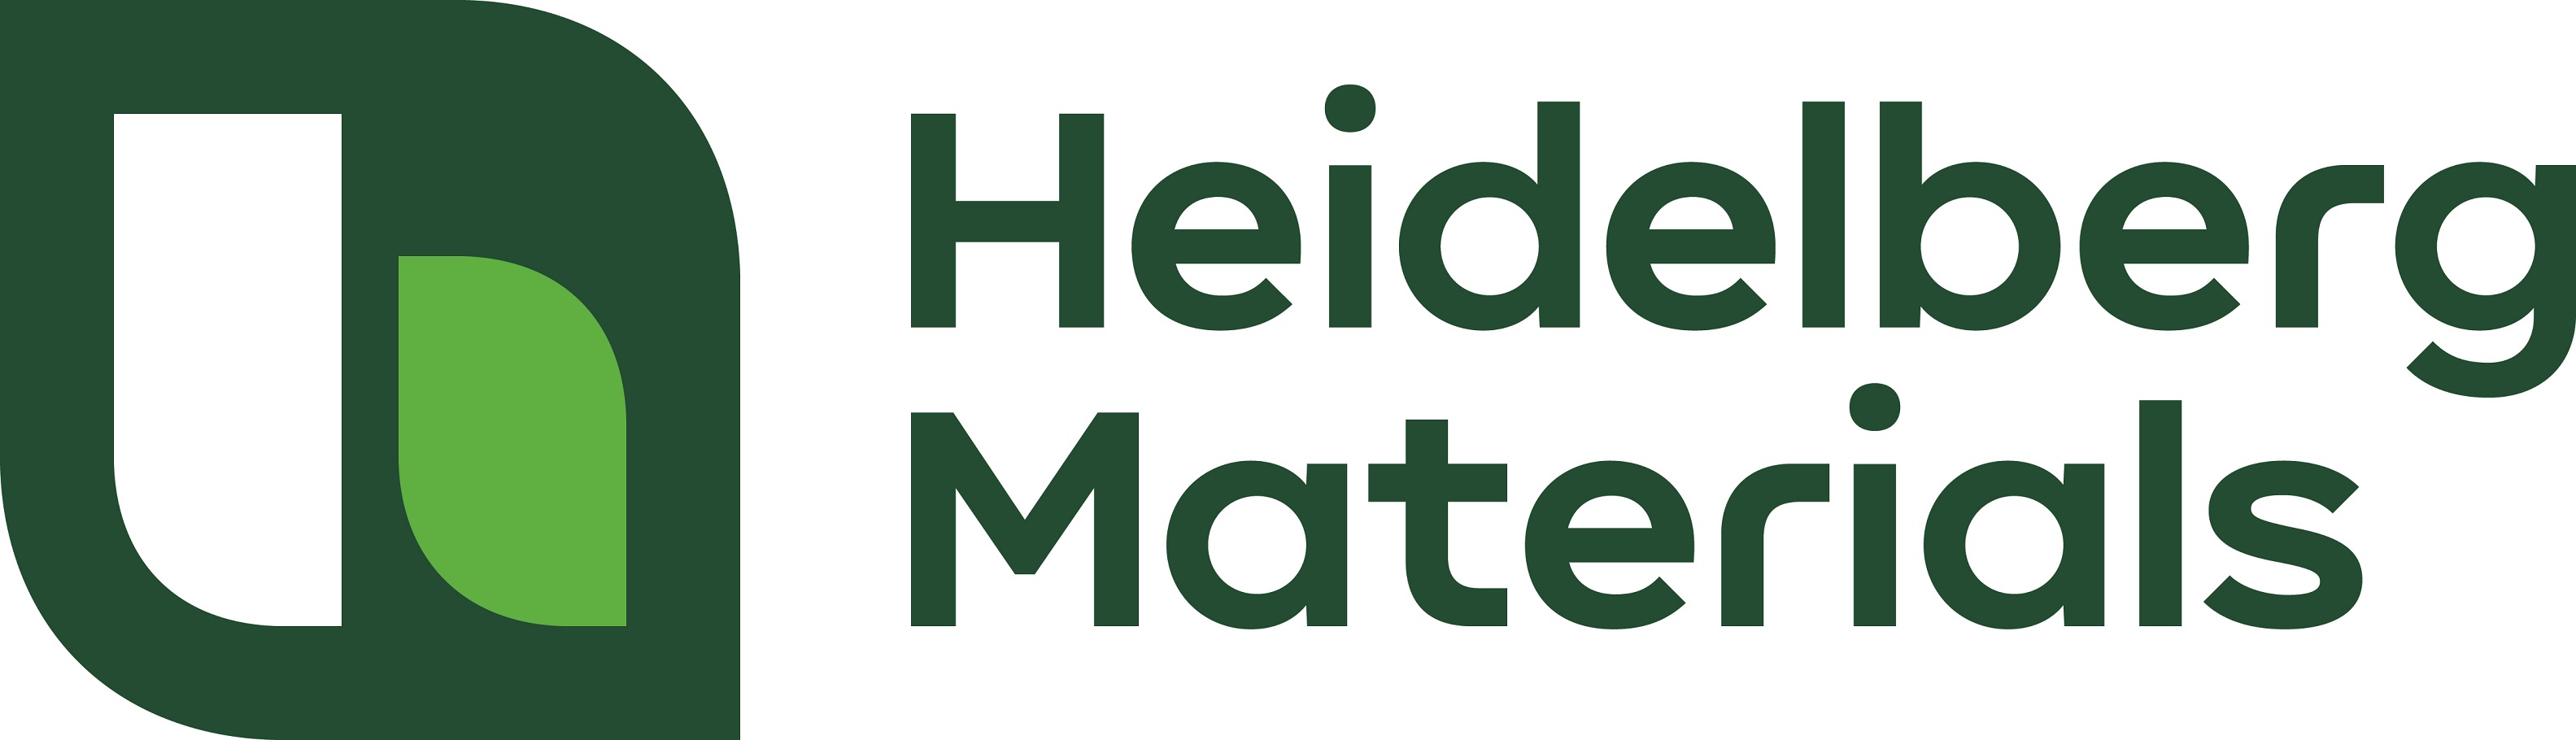 Heidelberg Materials says the acquisition is in line with its strategic plan to boost its business through bolt-on acquisitions